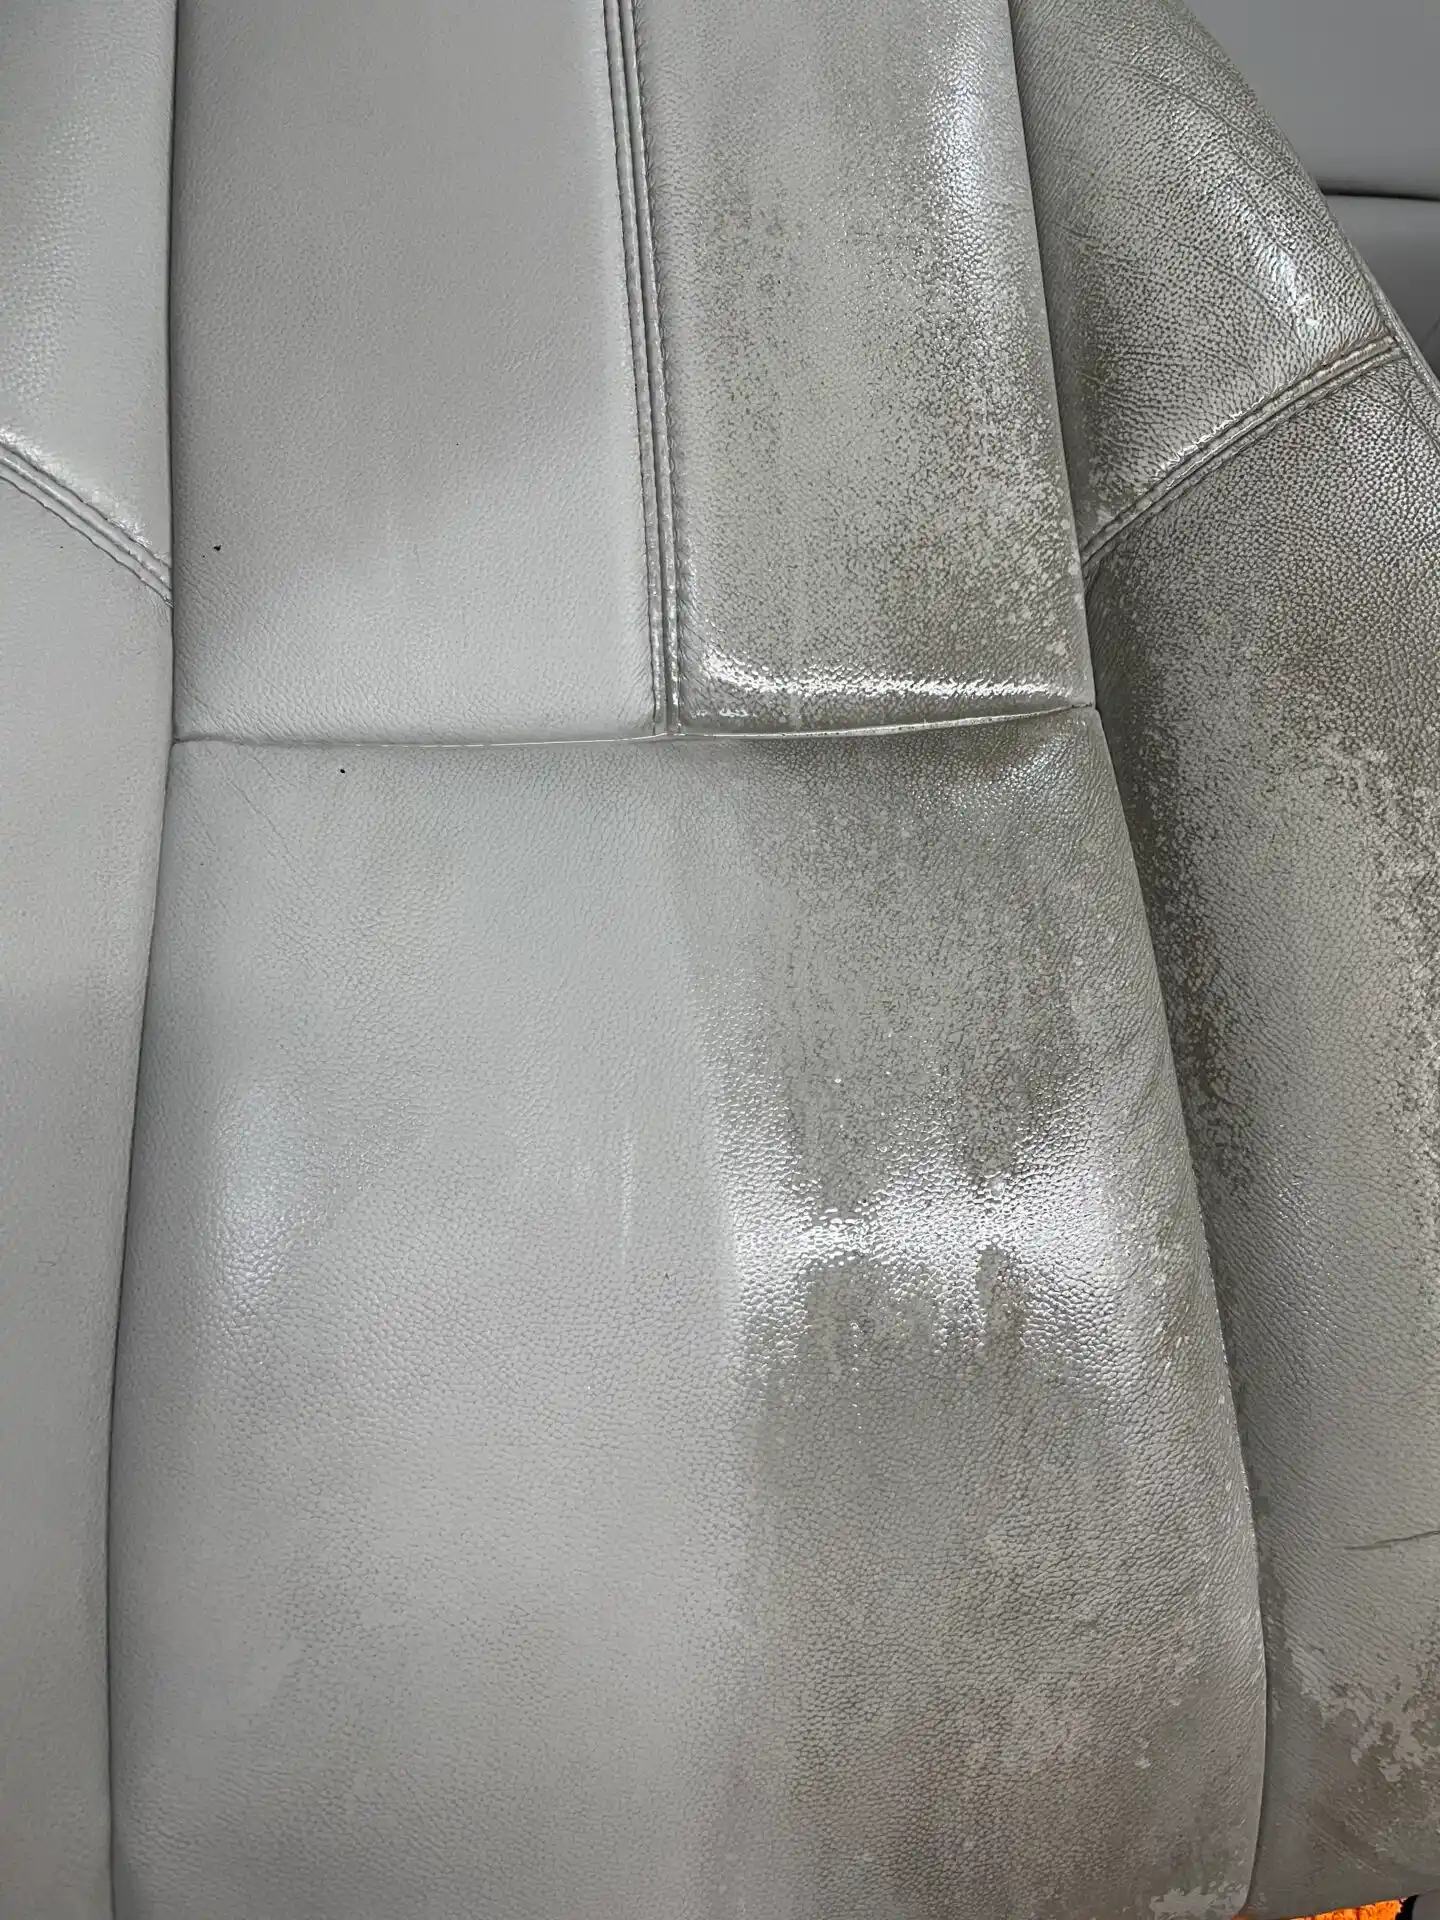 A close up of the seat back of a car